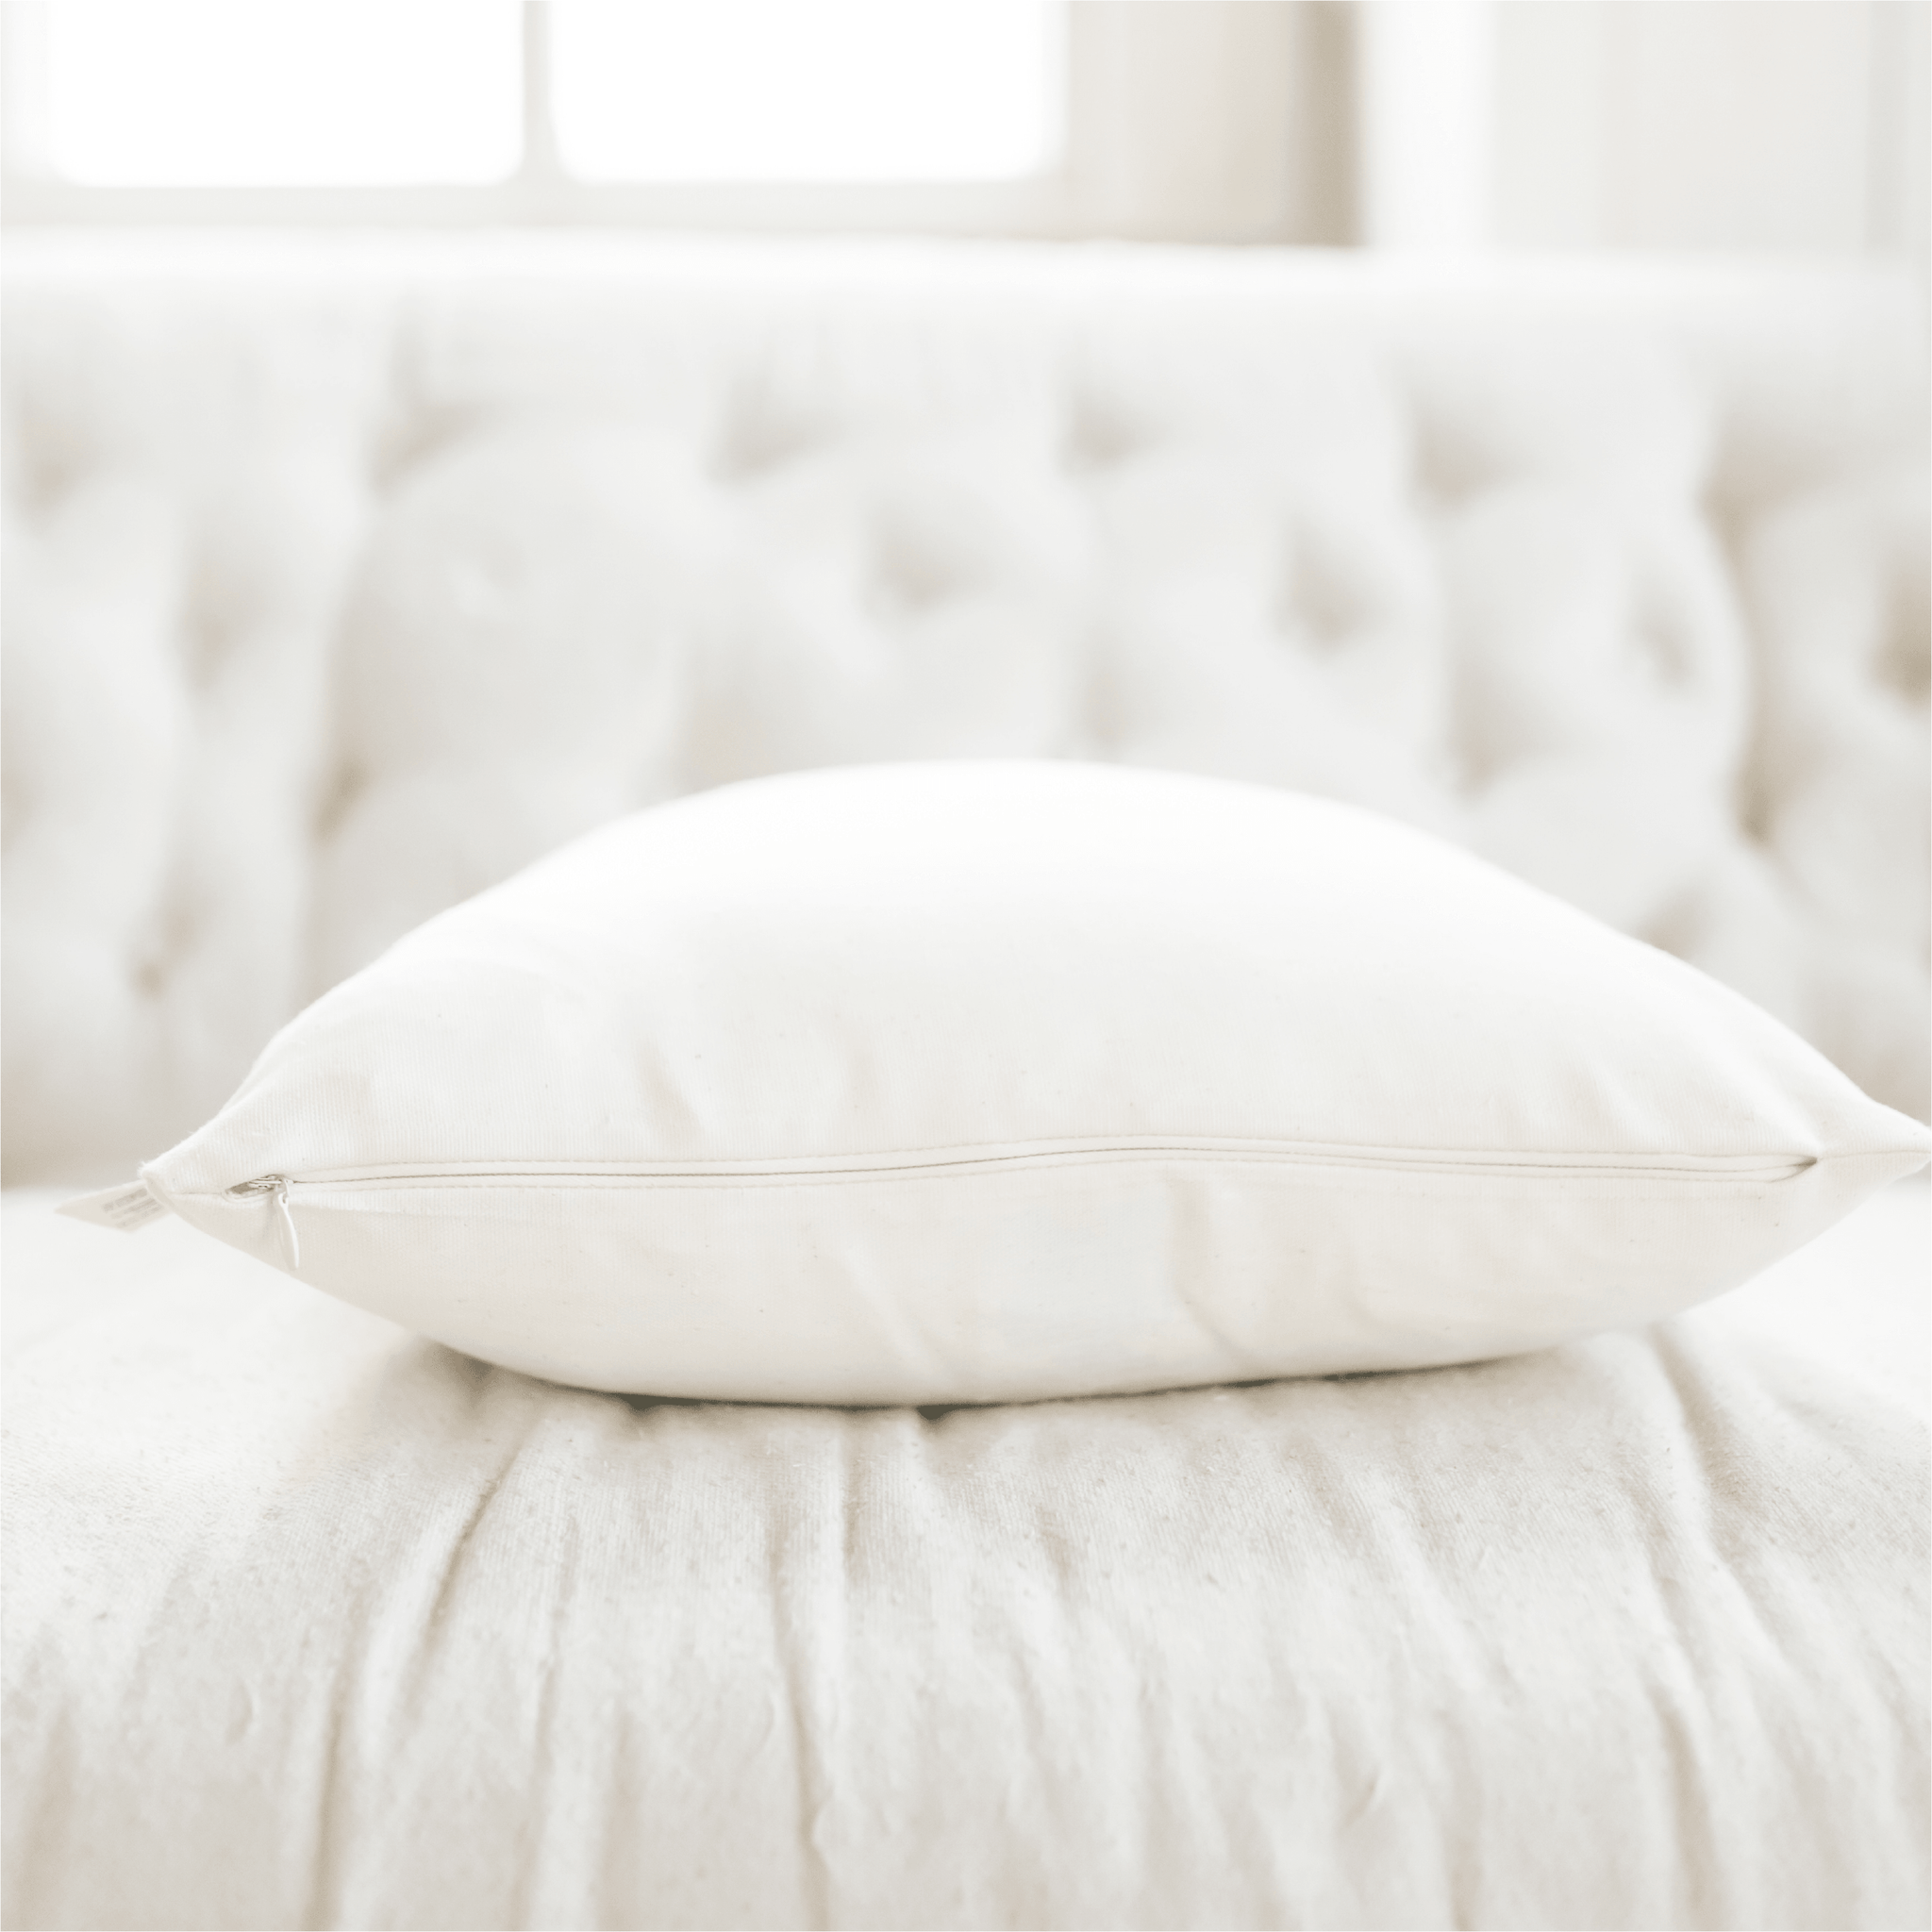 ethically sourced Live Simply Pillow Life In Alignment